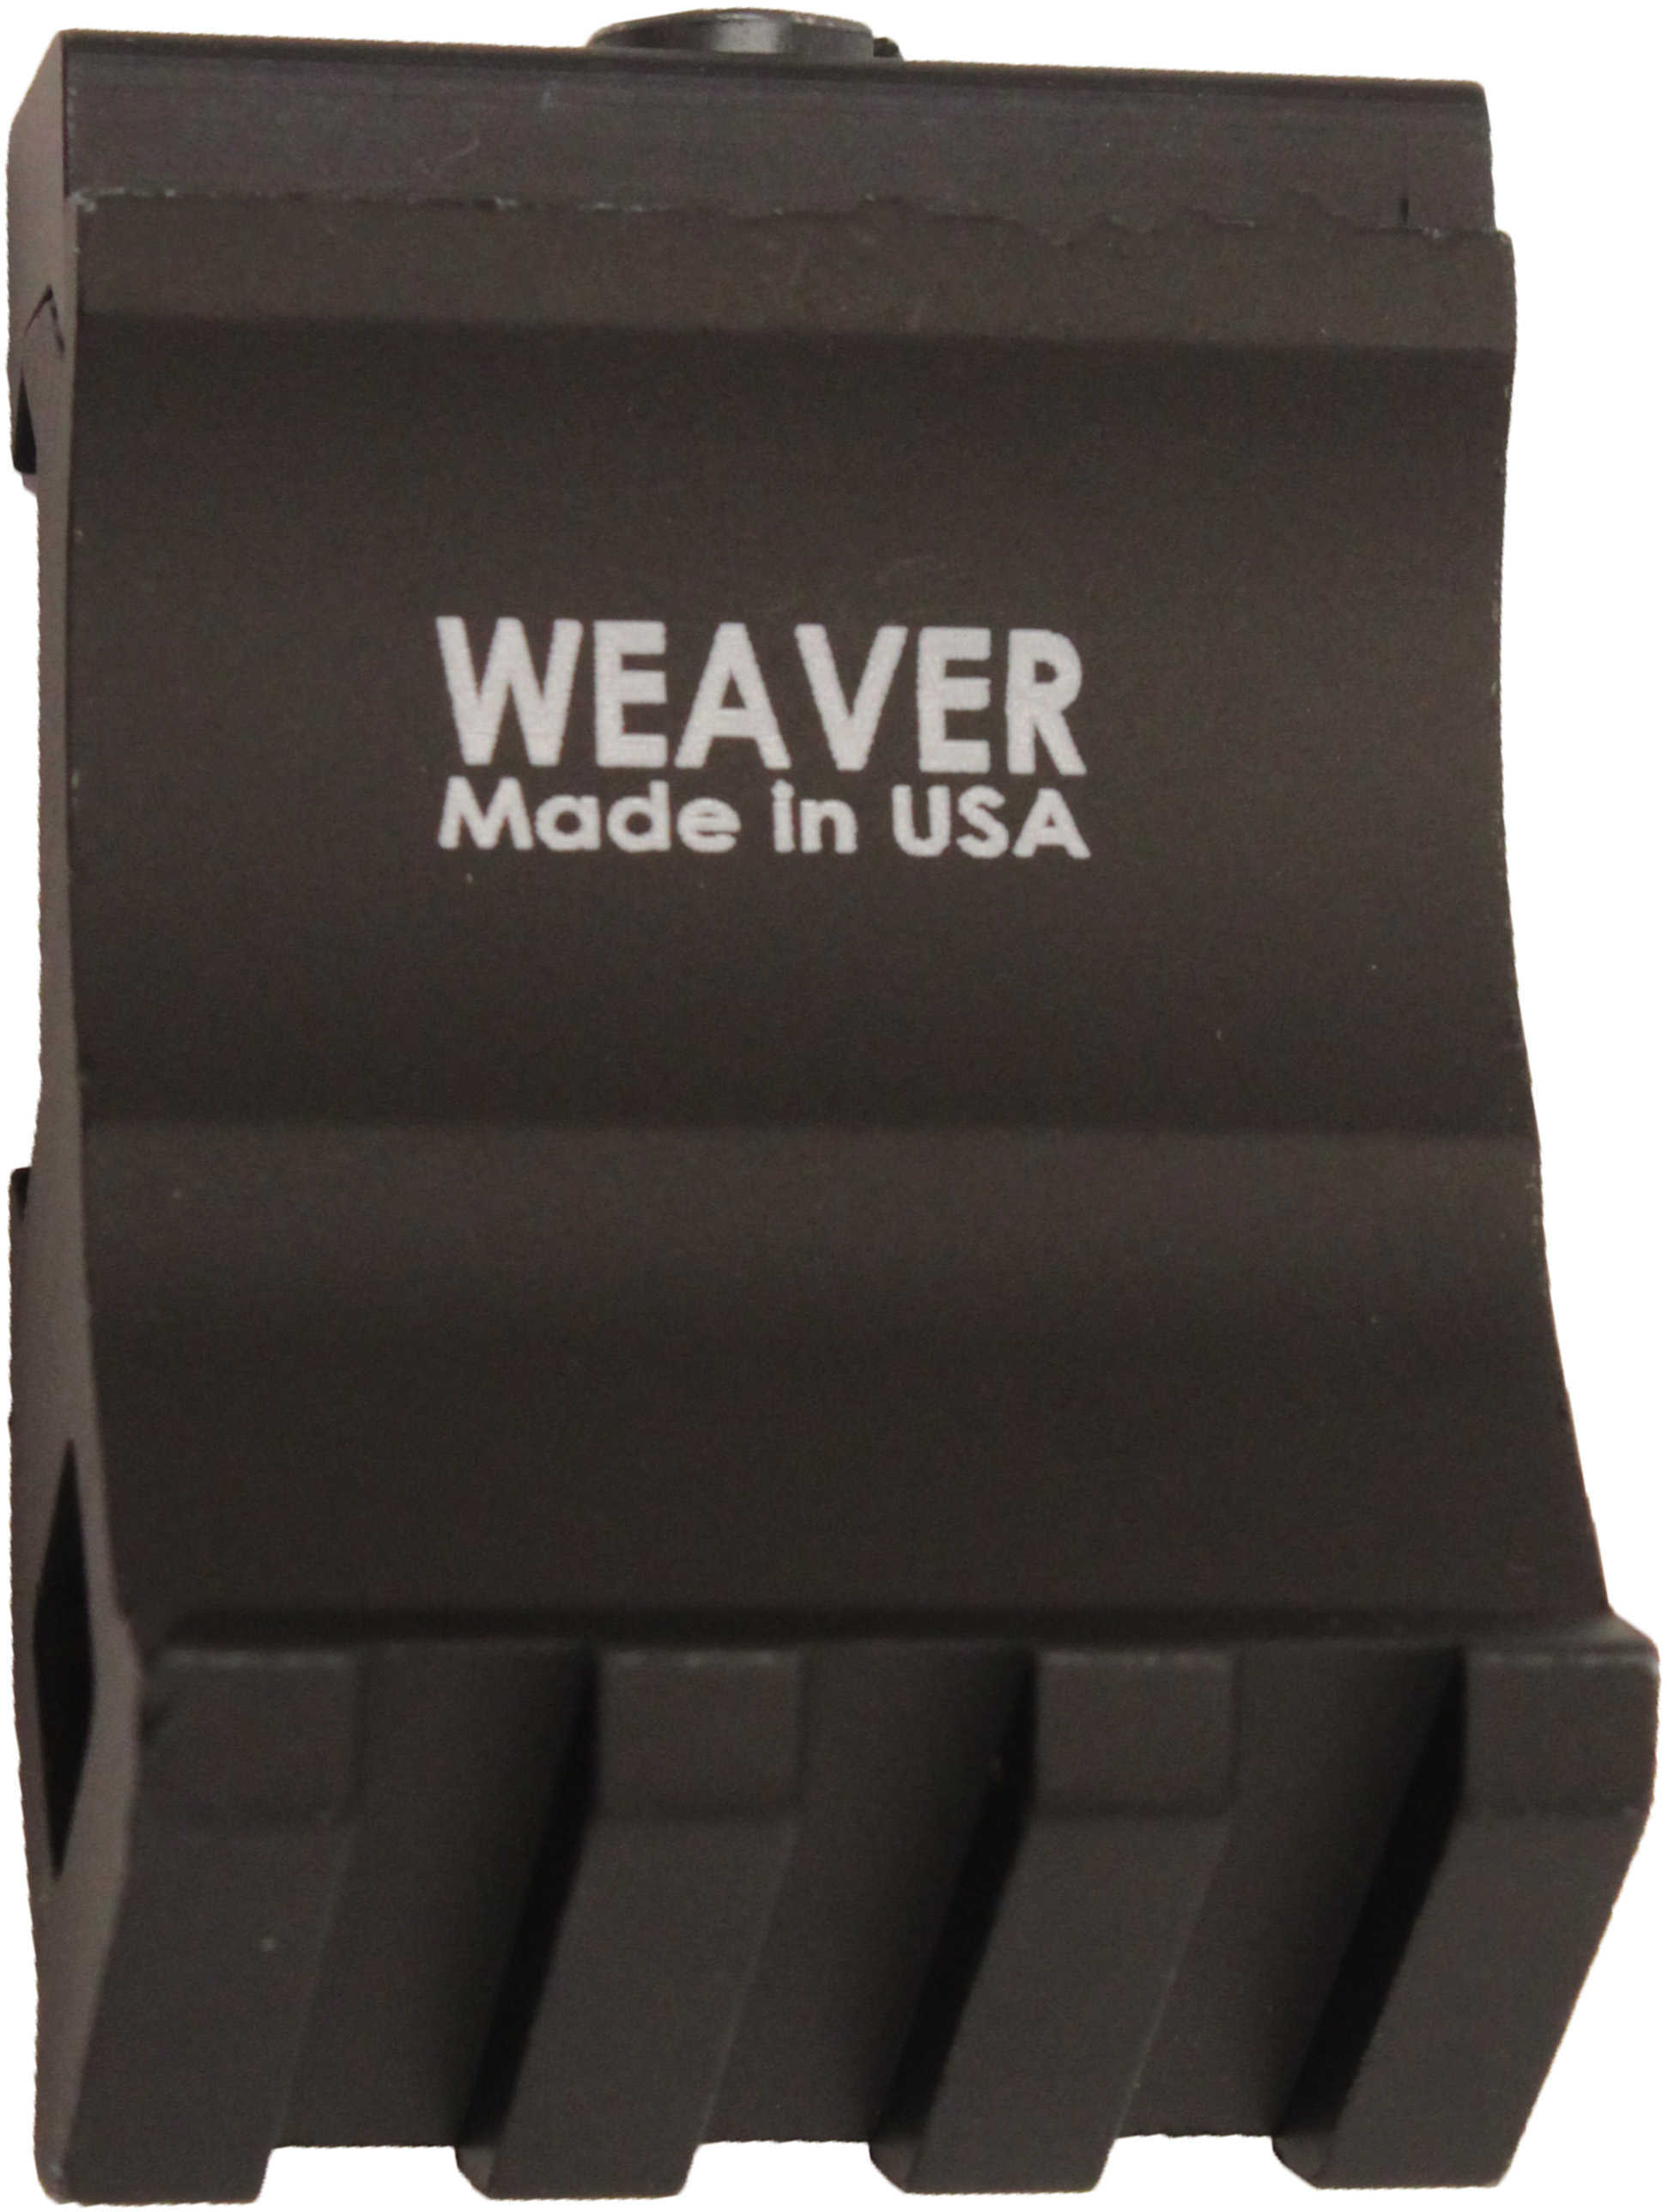 Weaver Tactical Offset Rail Adapter Mounts on Picatinny spec rails - Perfect for mounting miniature red dot 99671